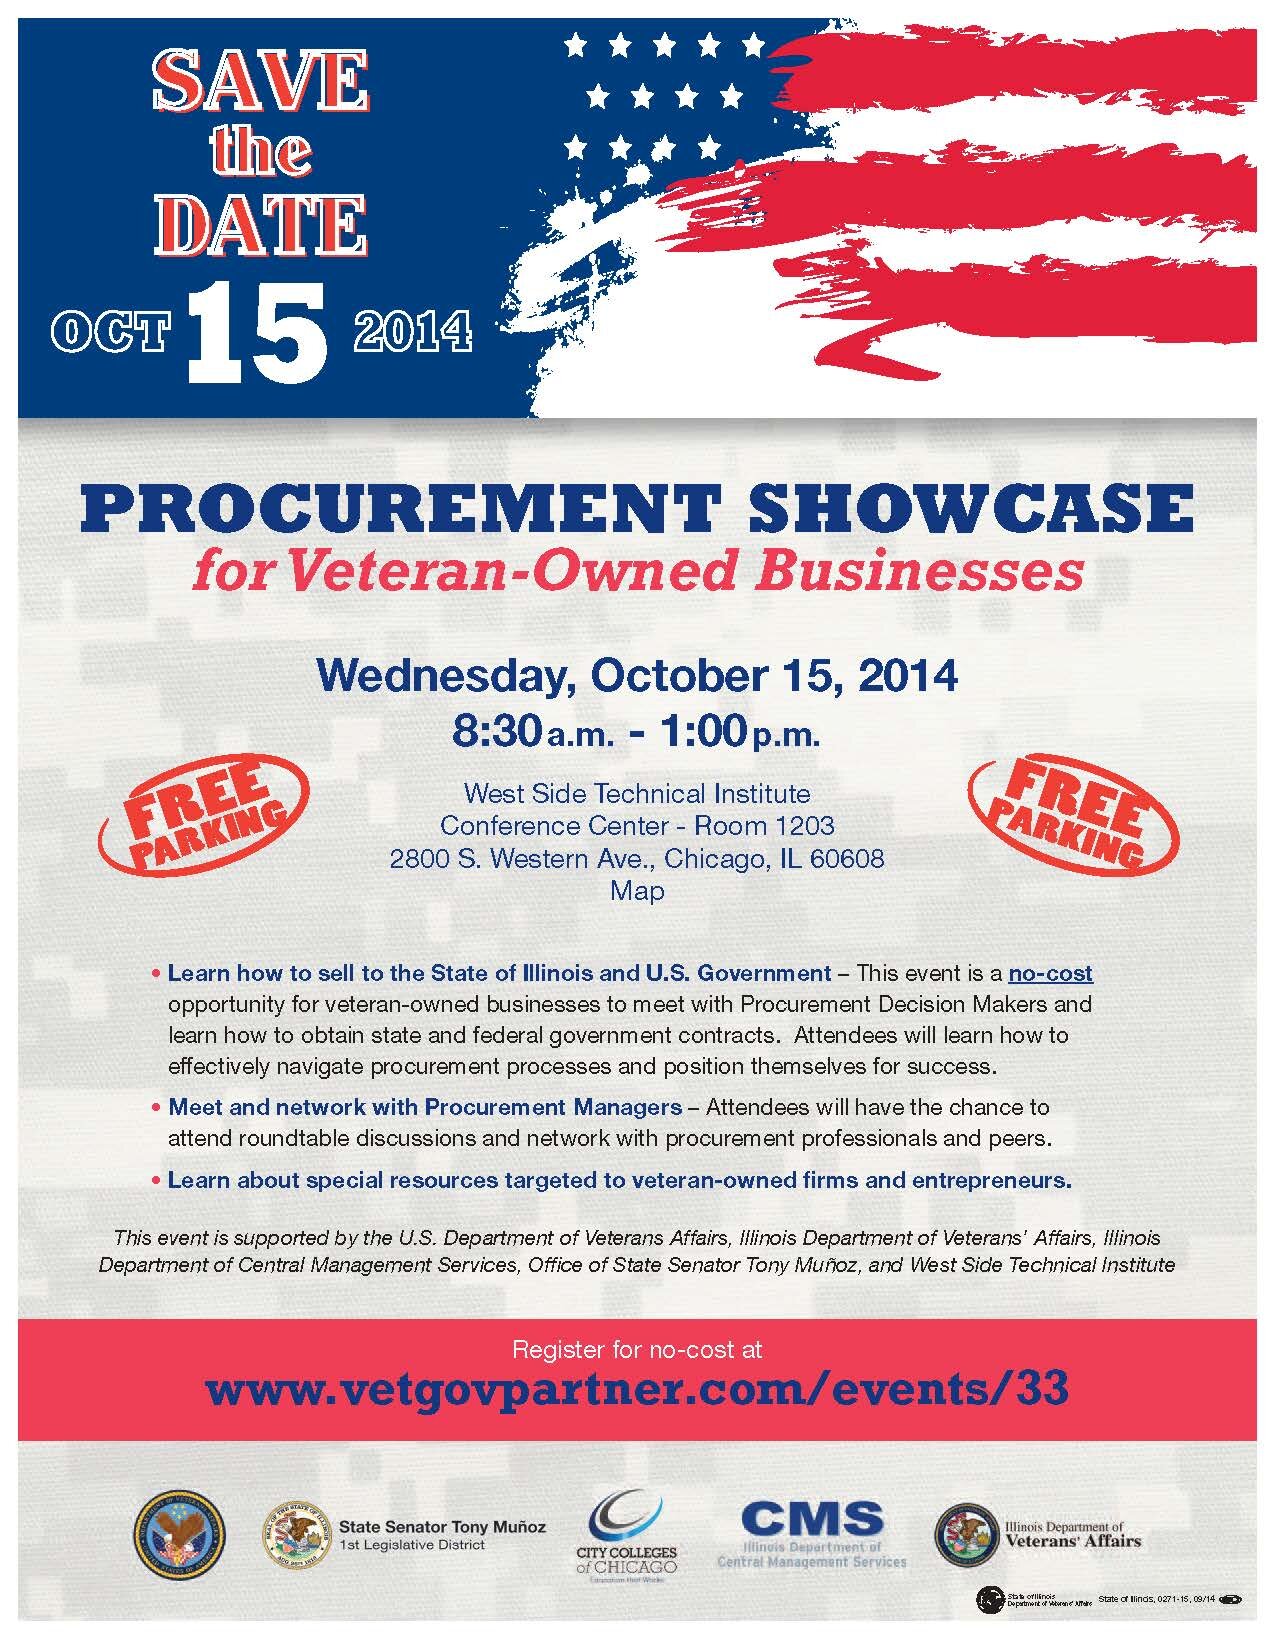 Procurement Showcase for Veteran-Owned Busineses - Oct 15 in Chicago